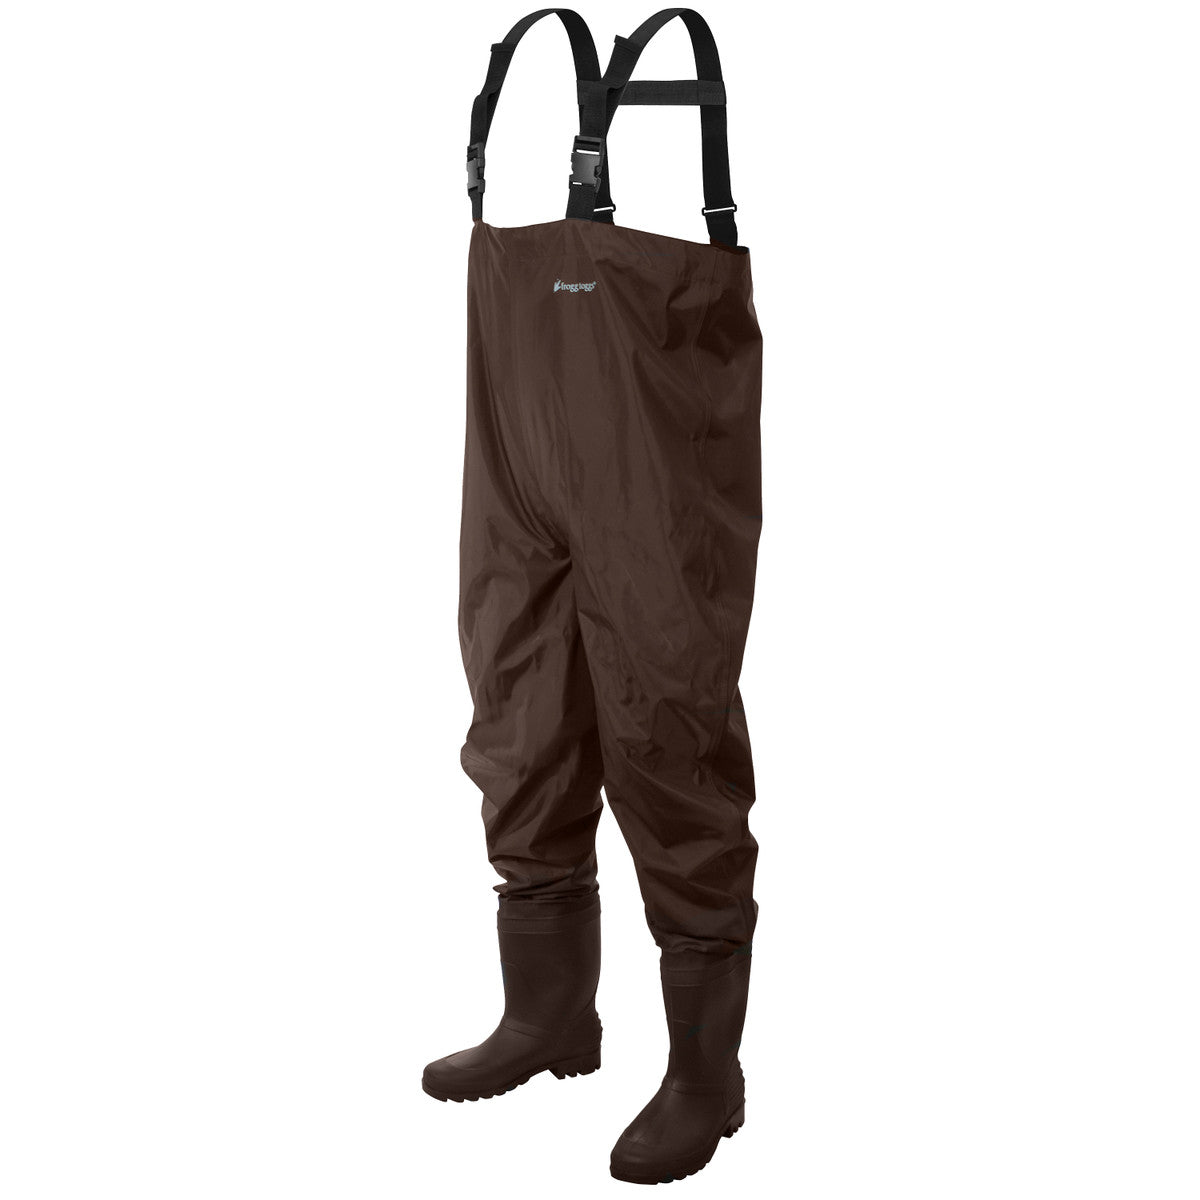 FROGG TOGGS MEN'S RANA PVC LUG CHEST WADER BROWN SIZE 11